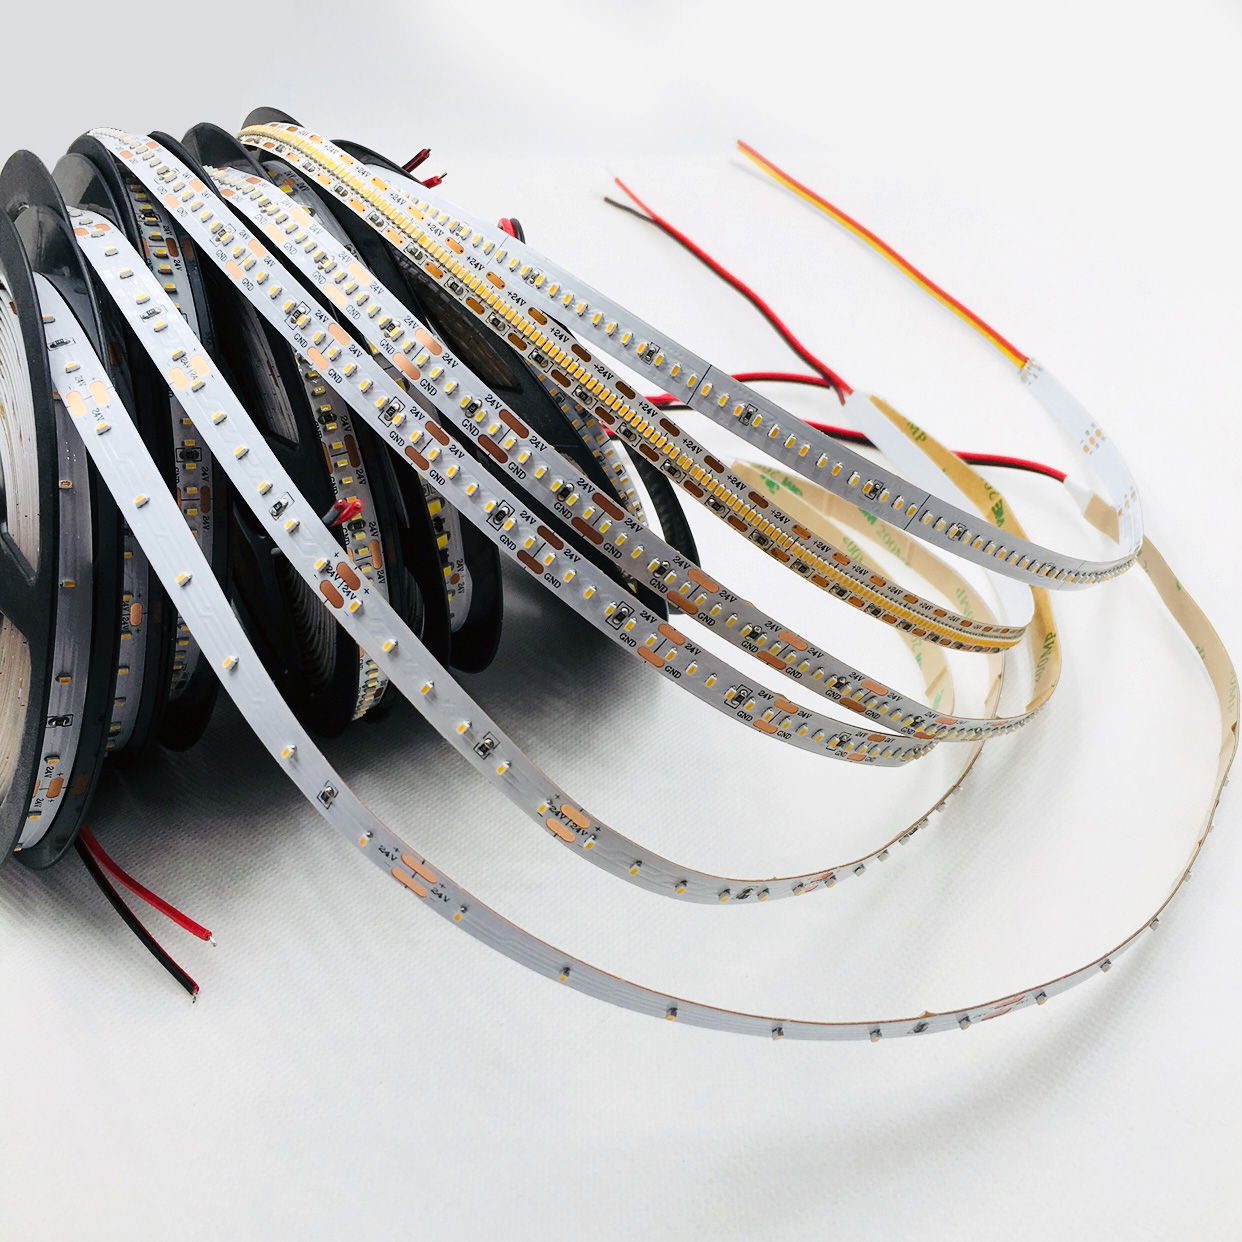 Top 6 Considerations Before Buying LED Strip Lights